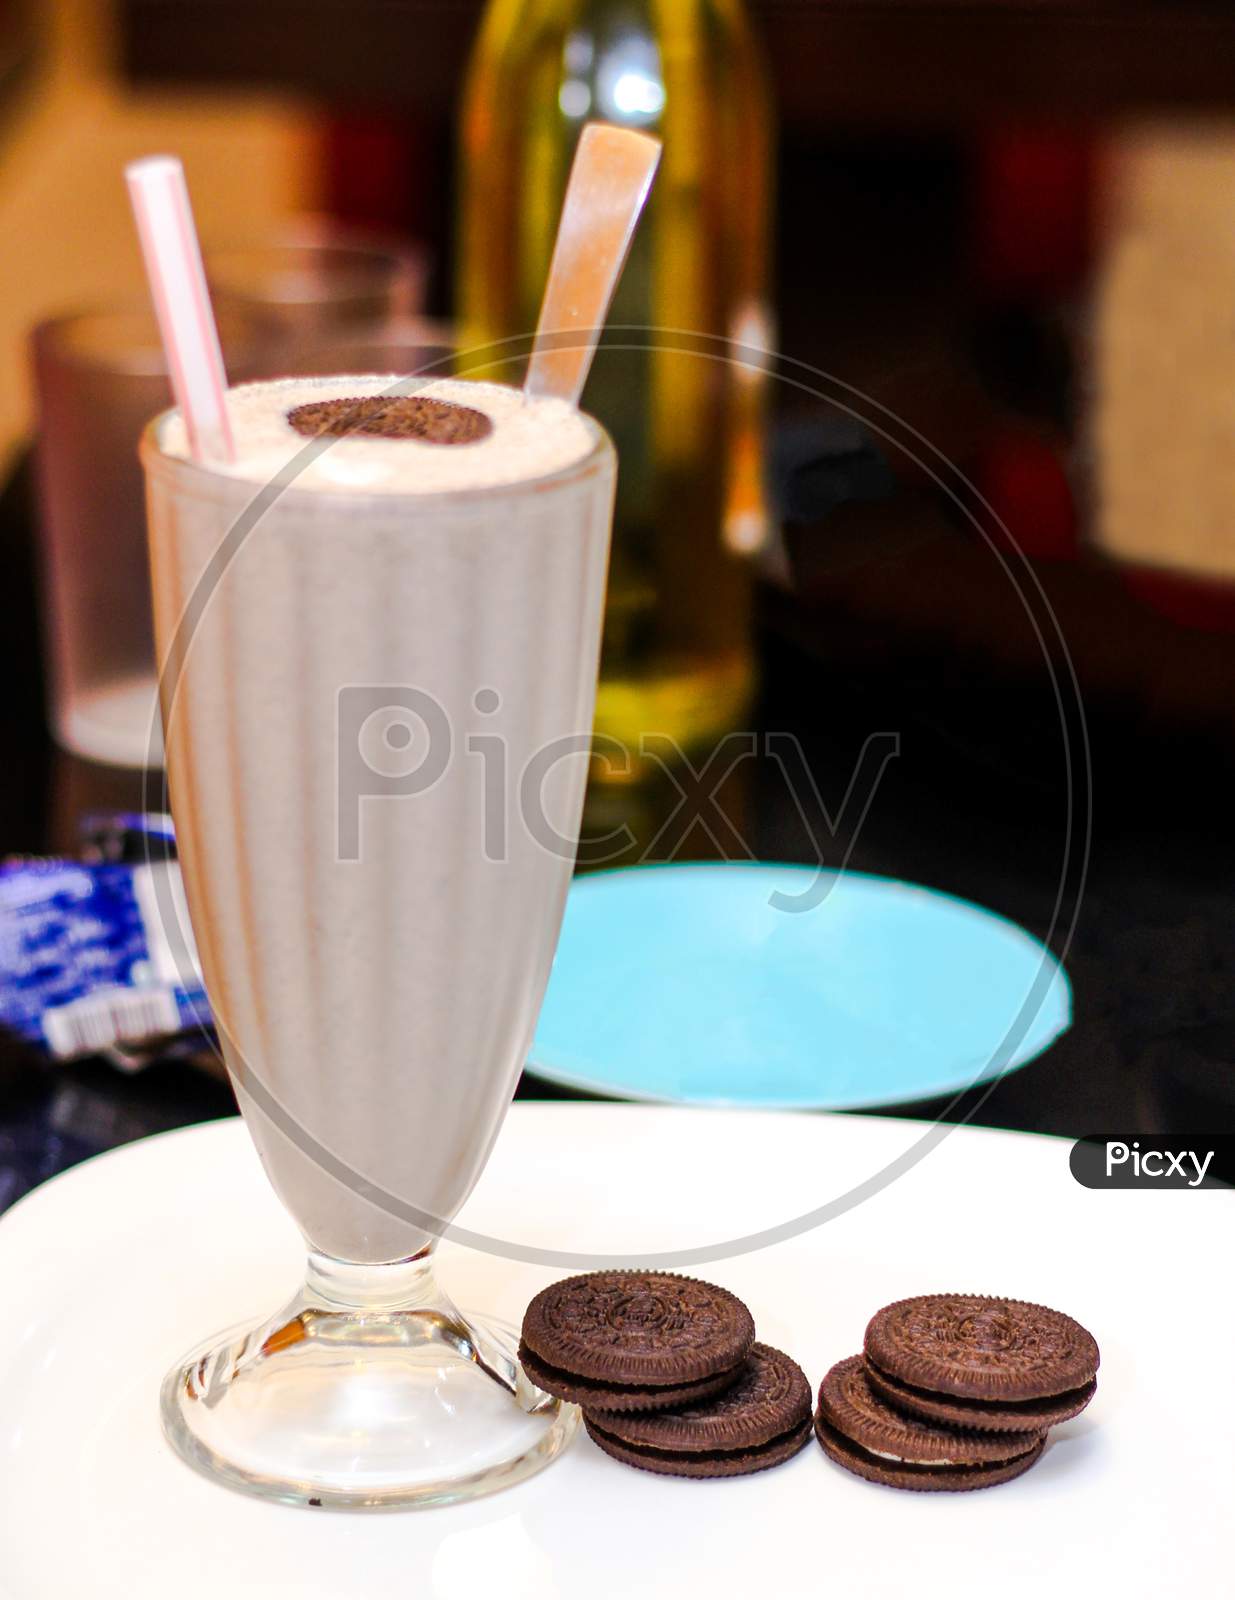 Cold Coffee With Chocolate Cookies